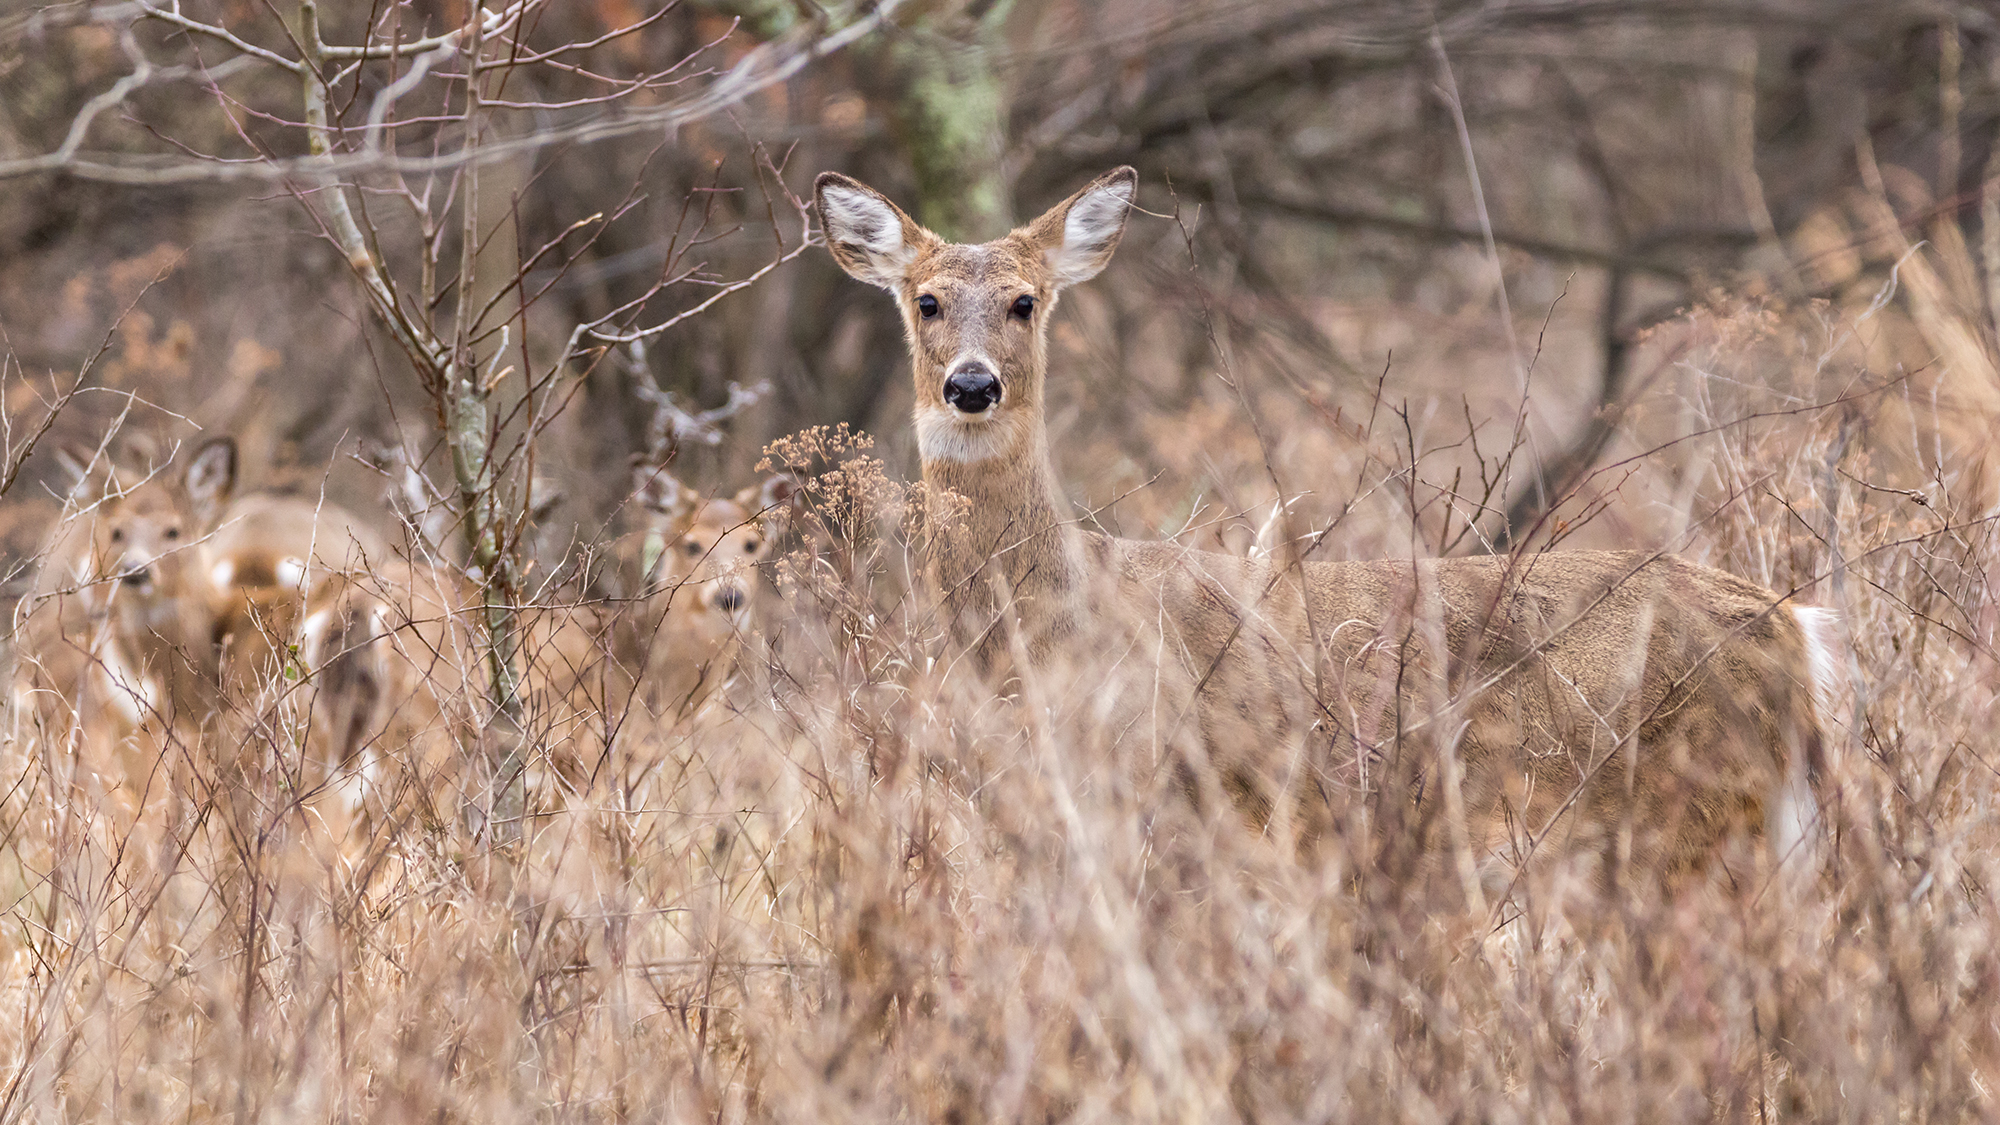 A whitetail deer stares at a hunter in the brush.